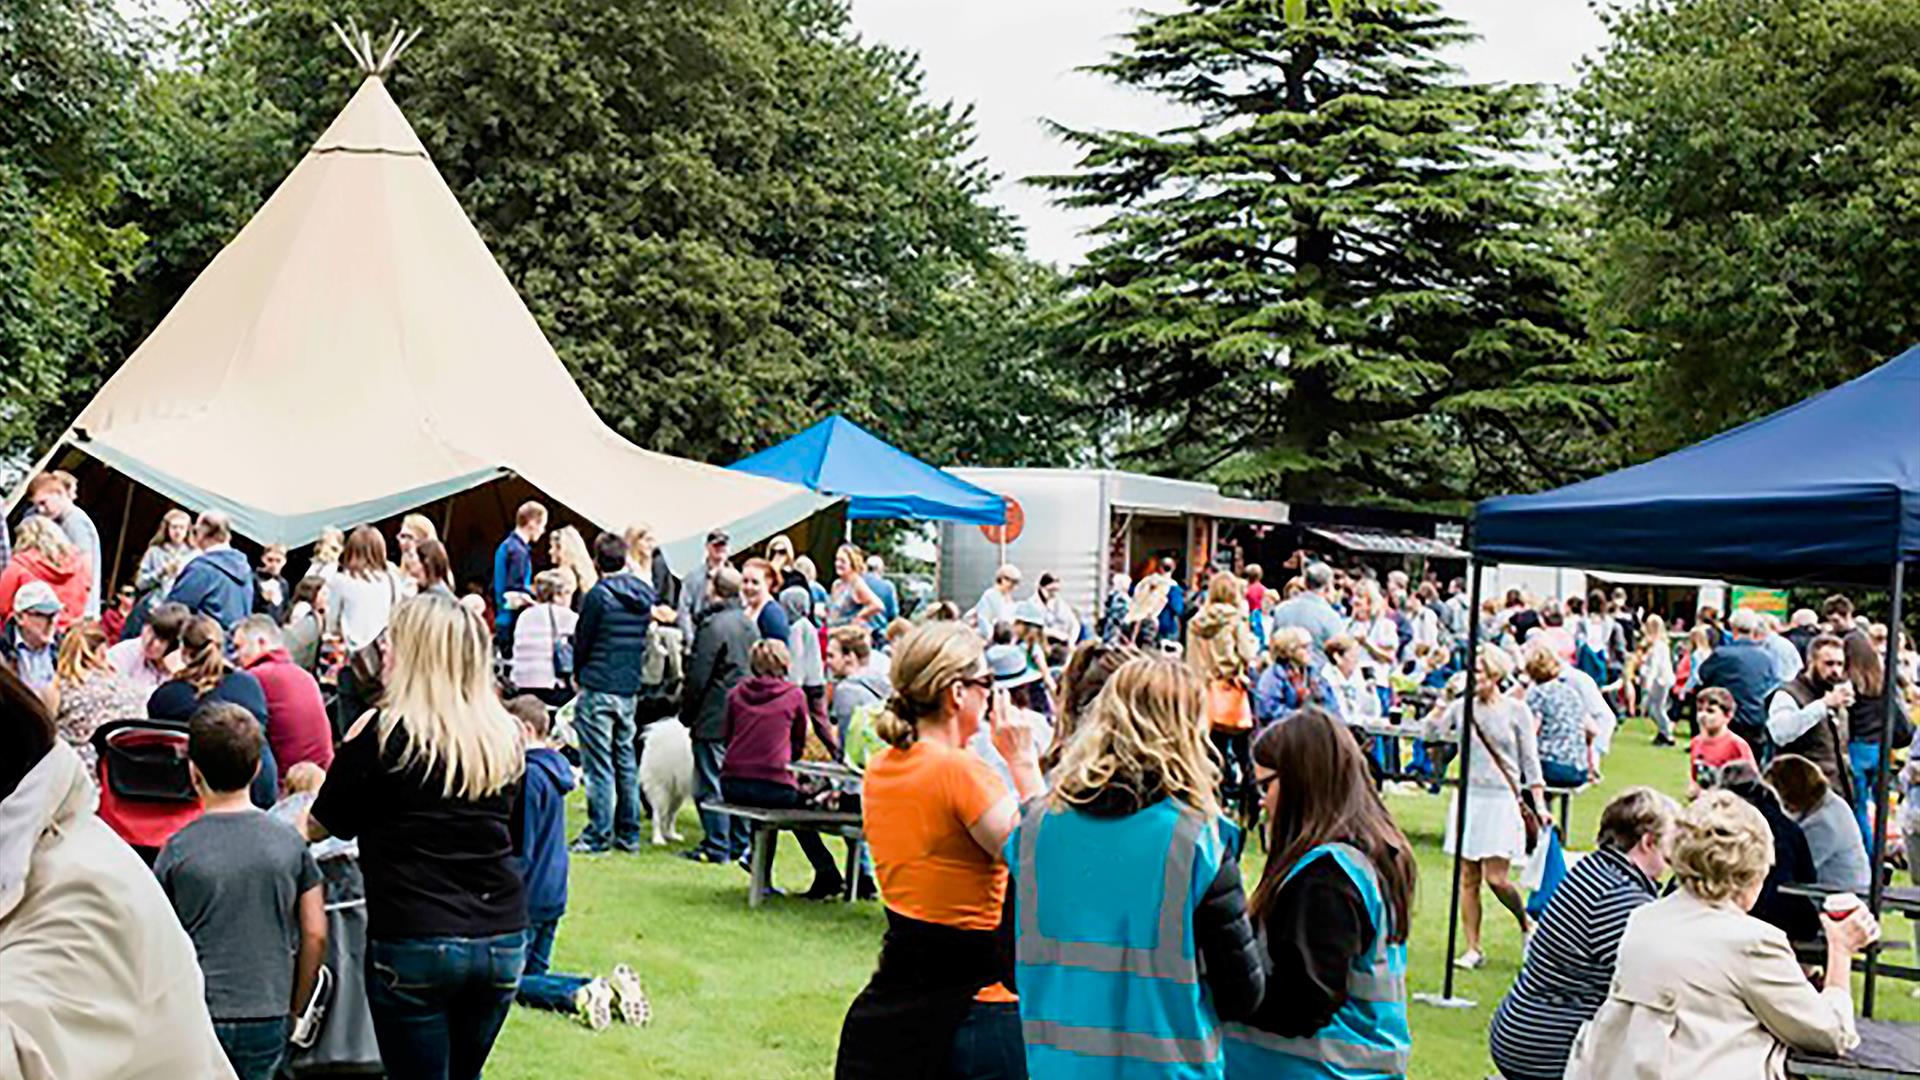 Image shows visitors enjoying food and drink at the Moira Speciality Food Fair